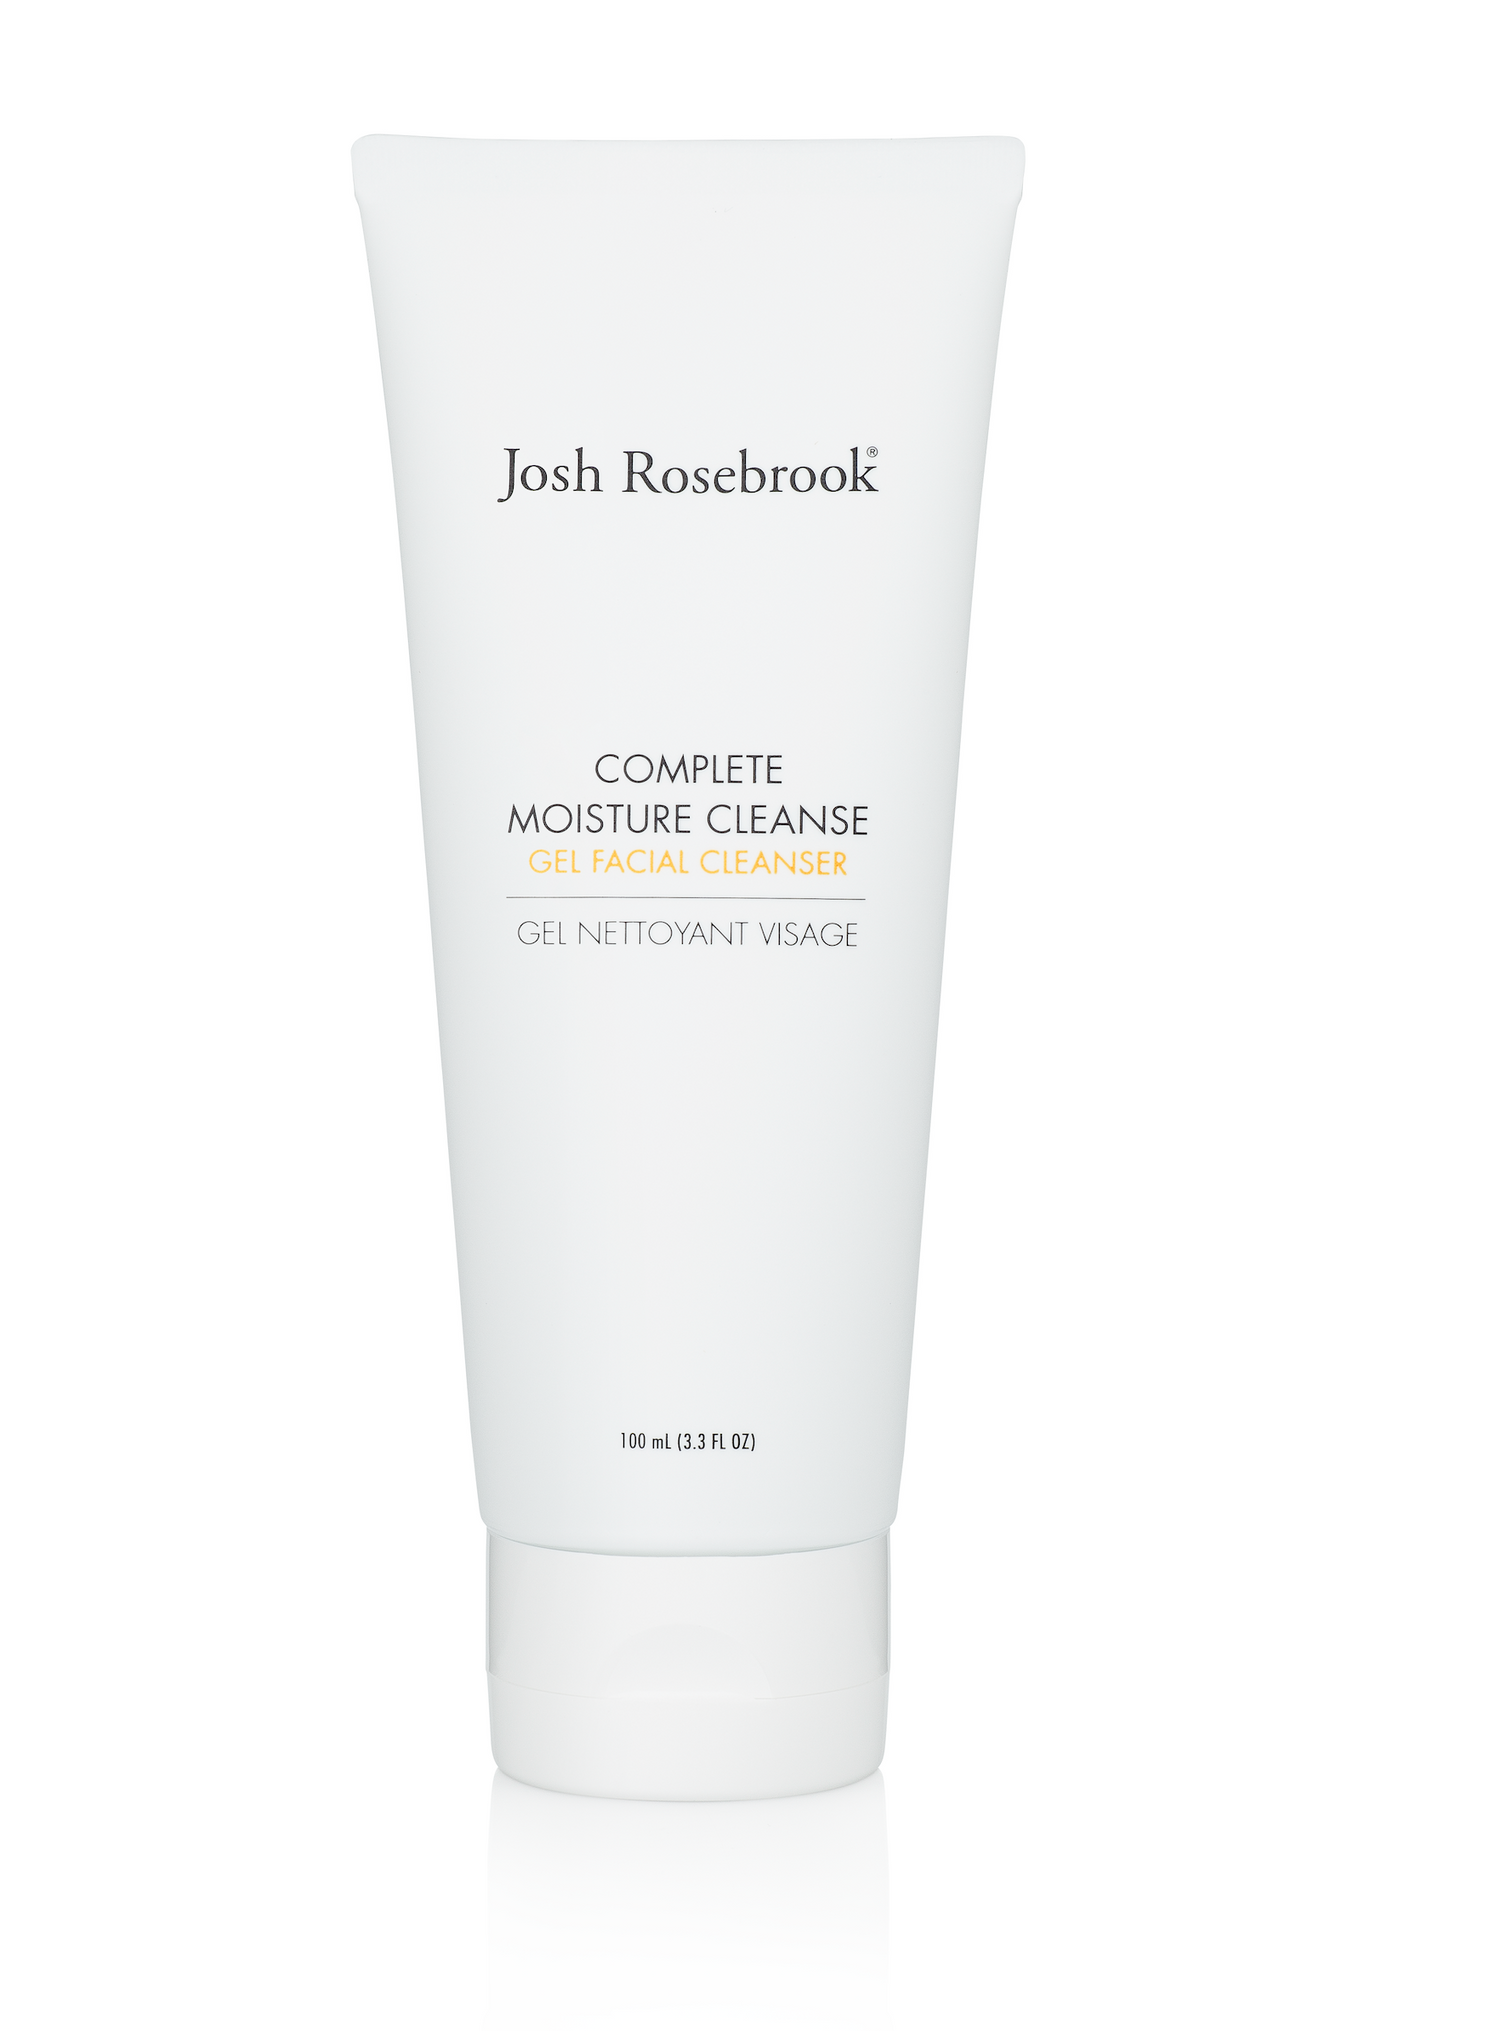 Complete Moisture Cleanse